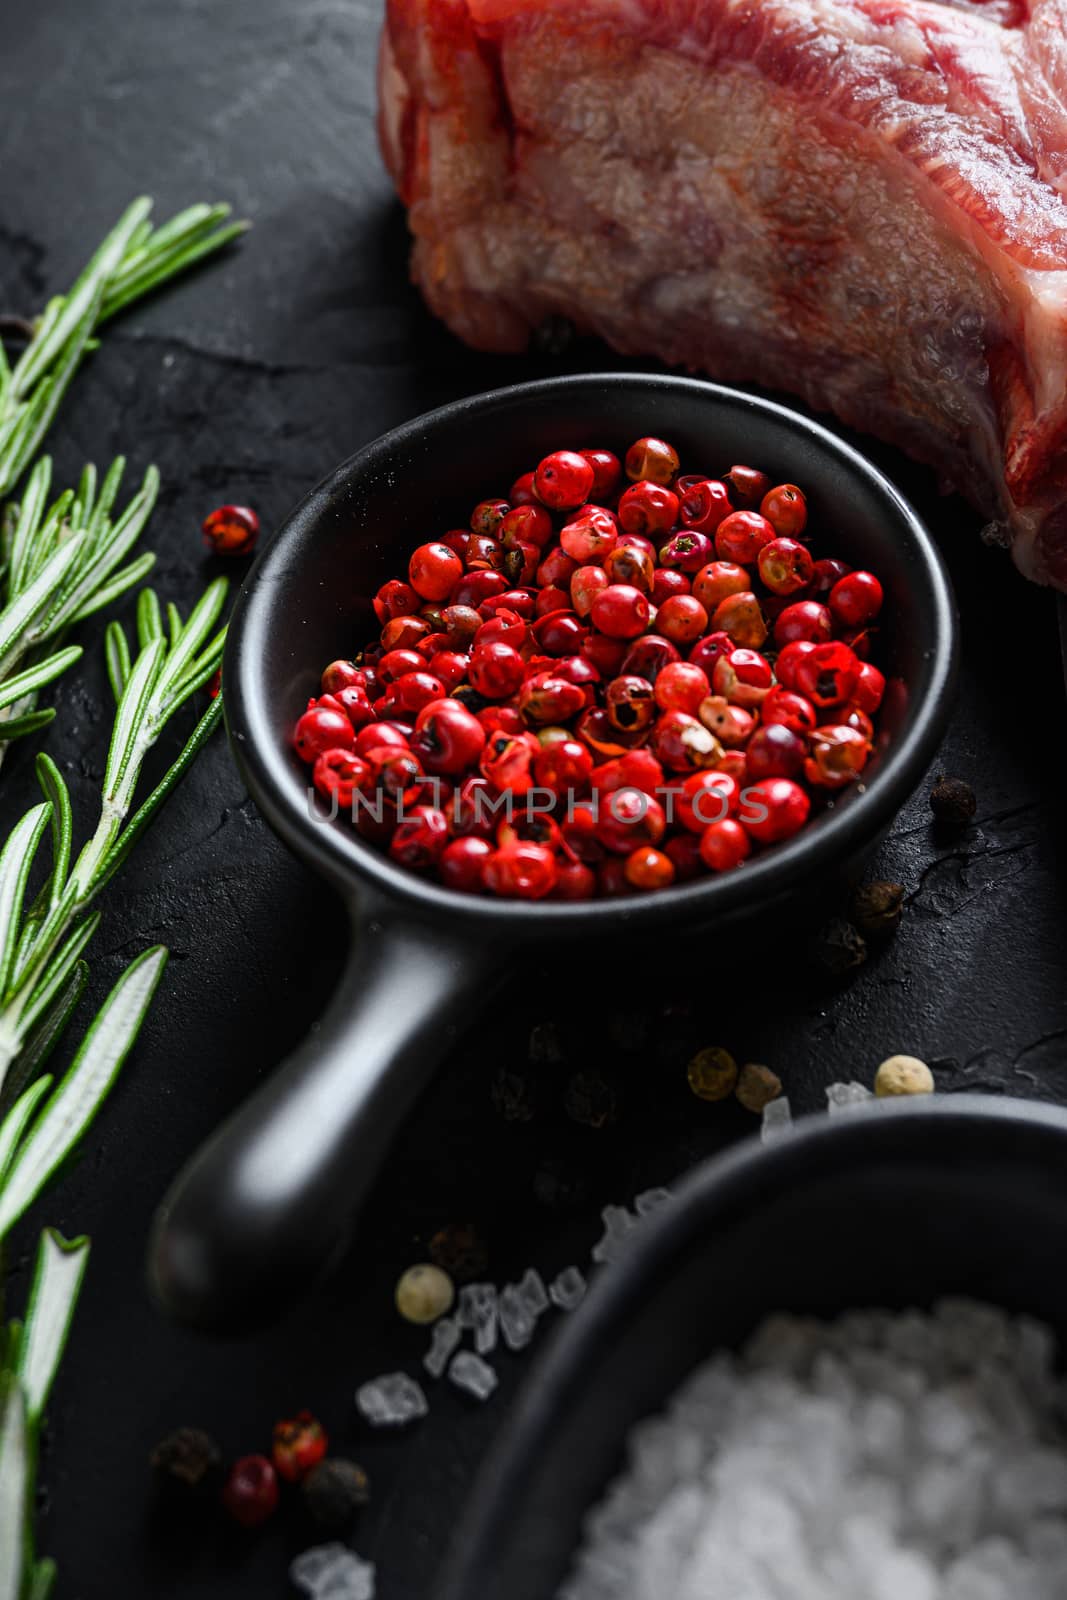 Rose Peppercorn and Rosemary herbs close up on black stone table with spices and raw meat near side view selective focus vertical. by Ilianesolenyi